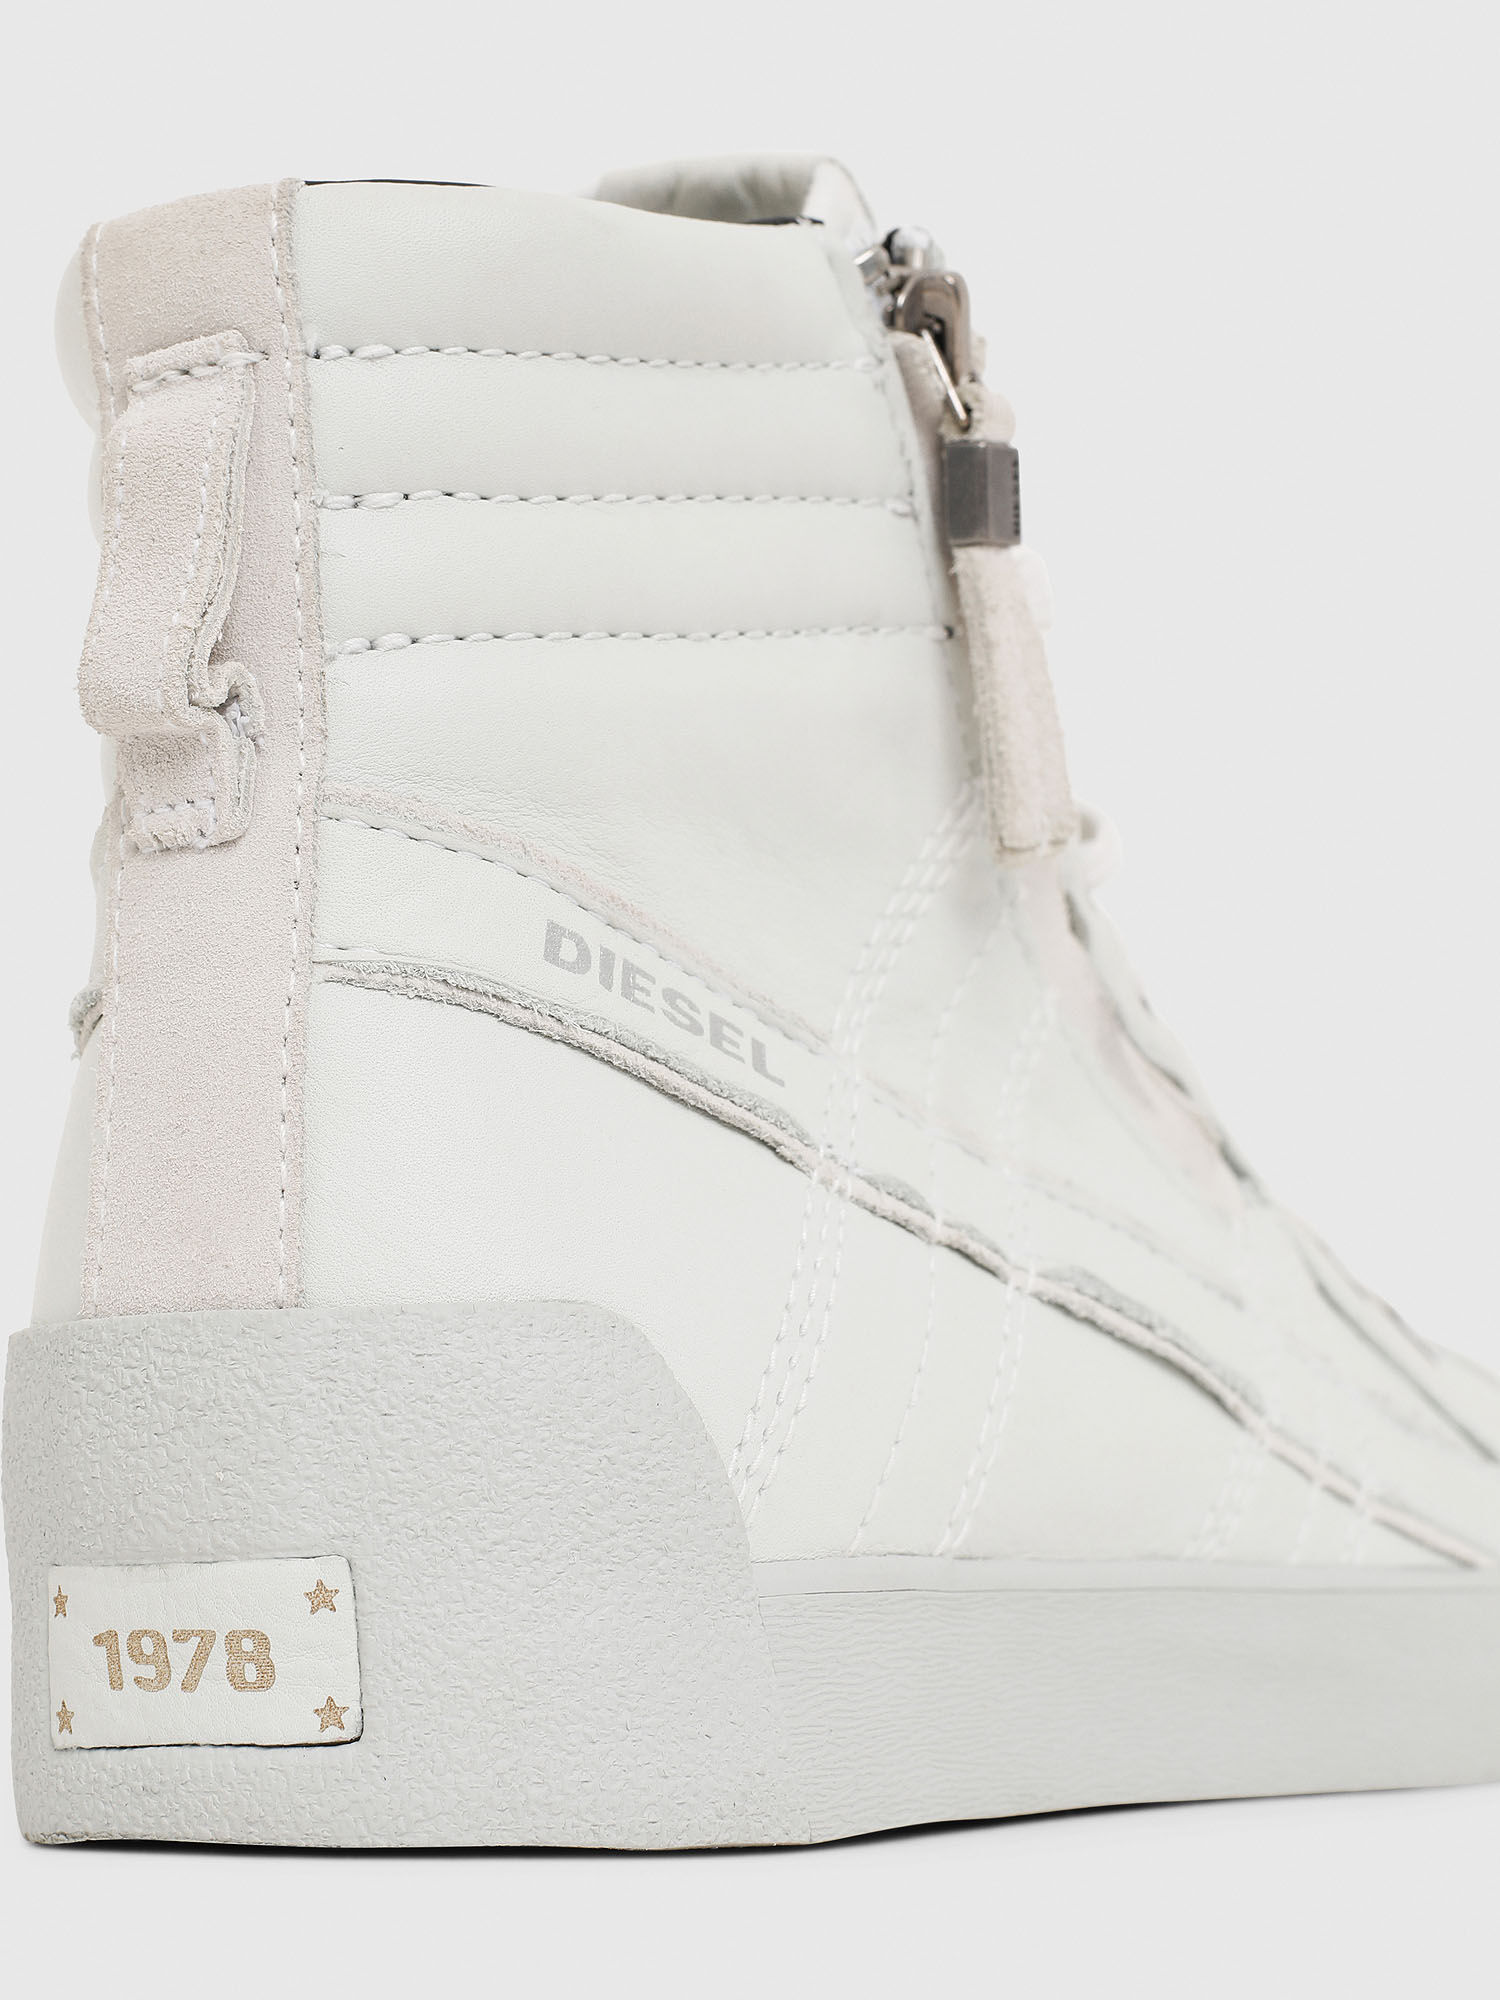 D-STRING PLUS High-top sneakers with zip detail |